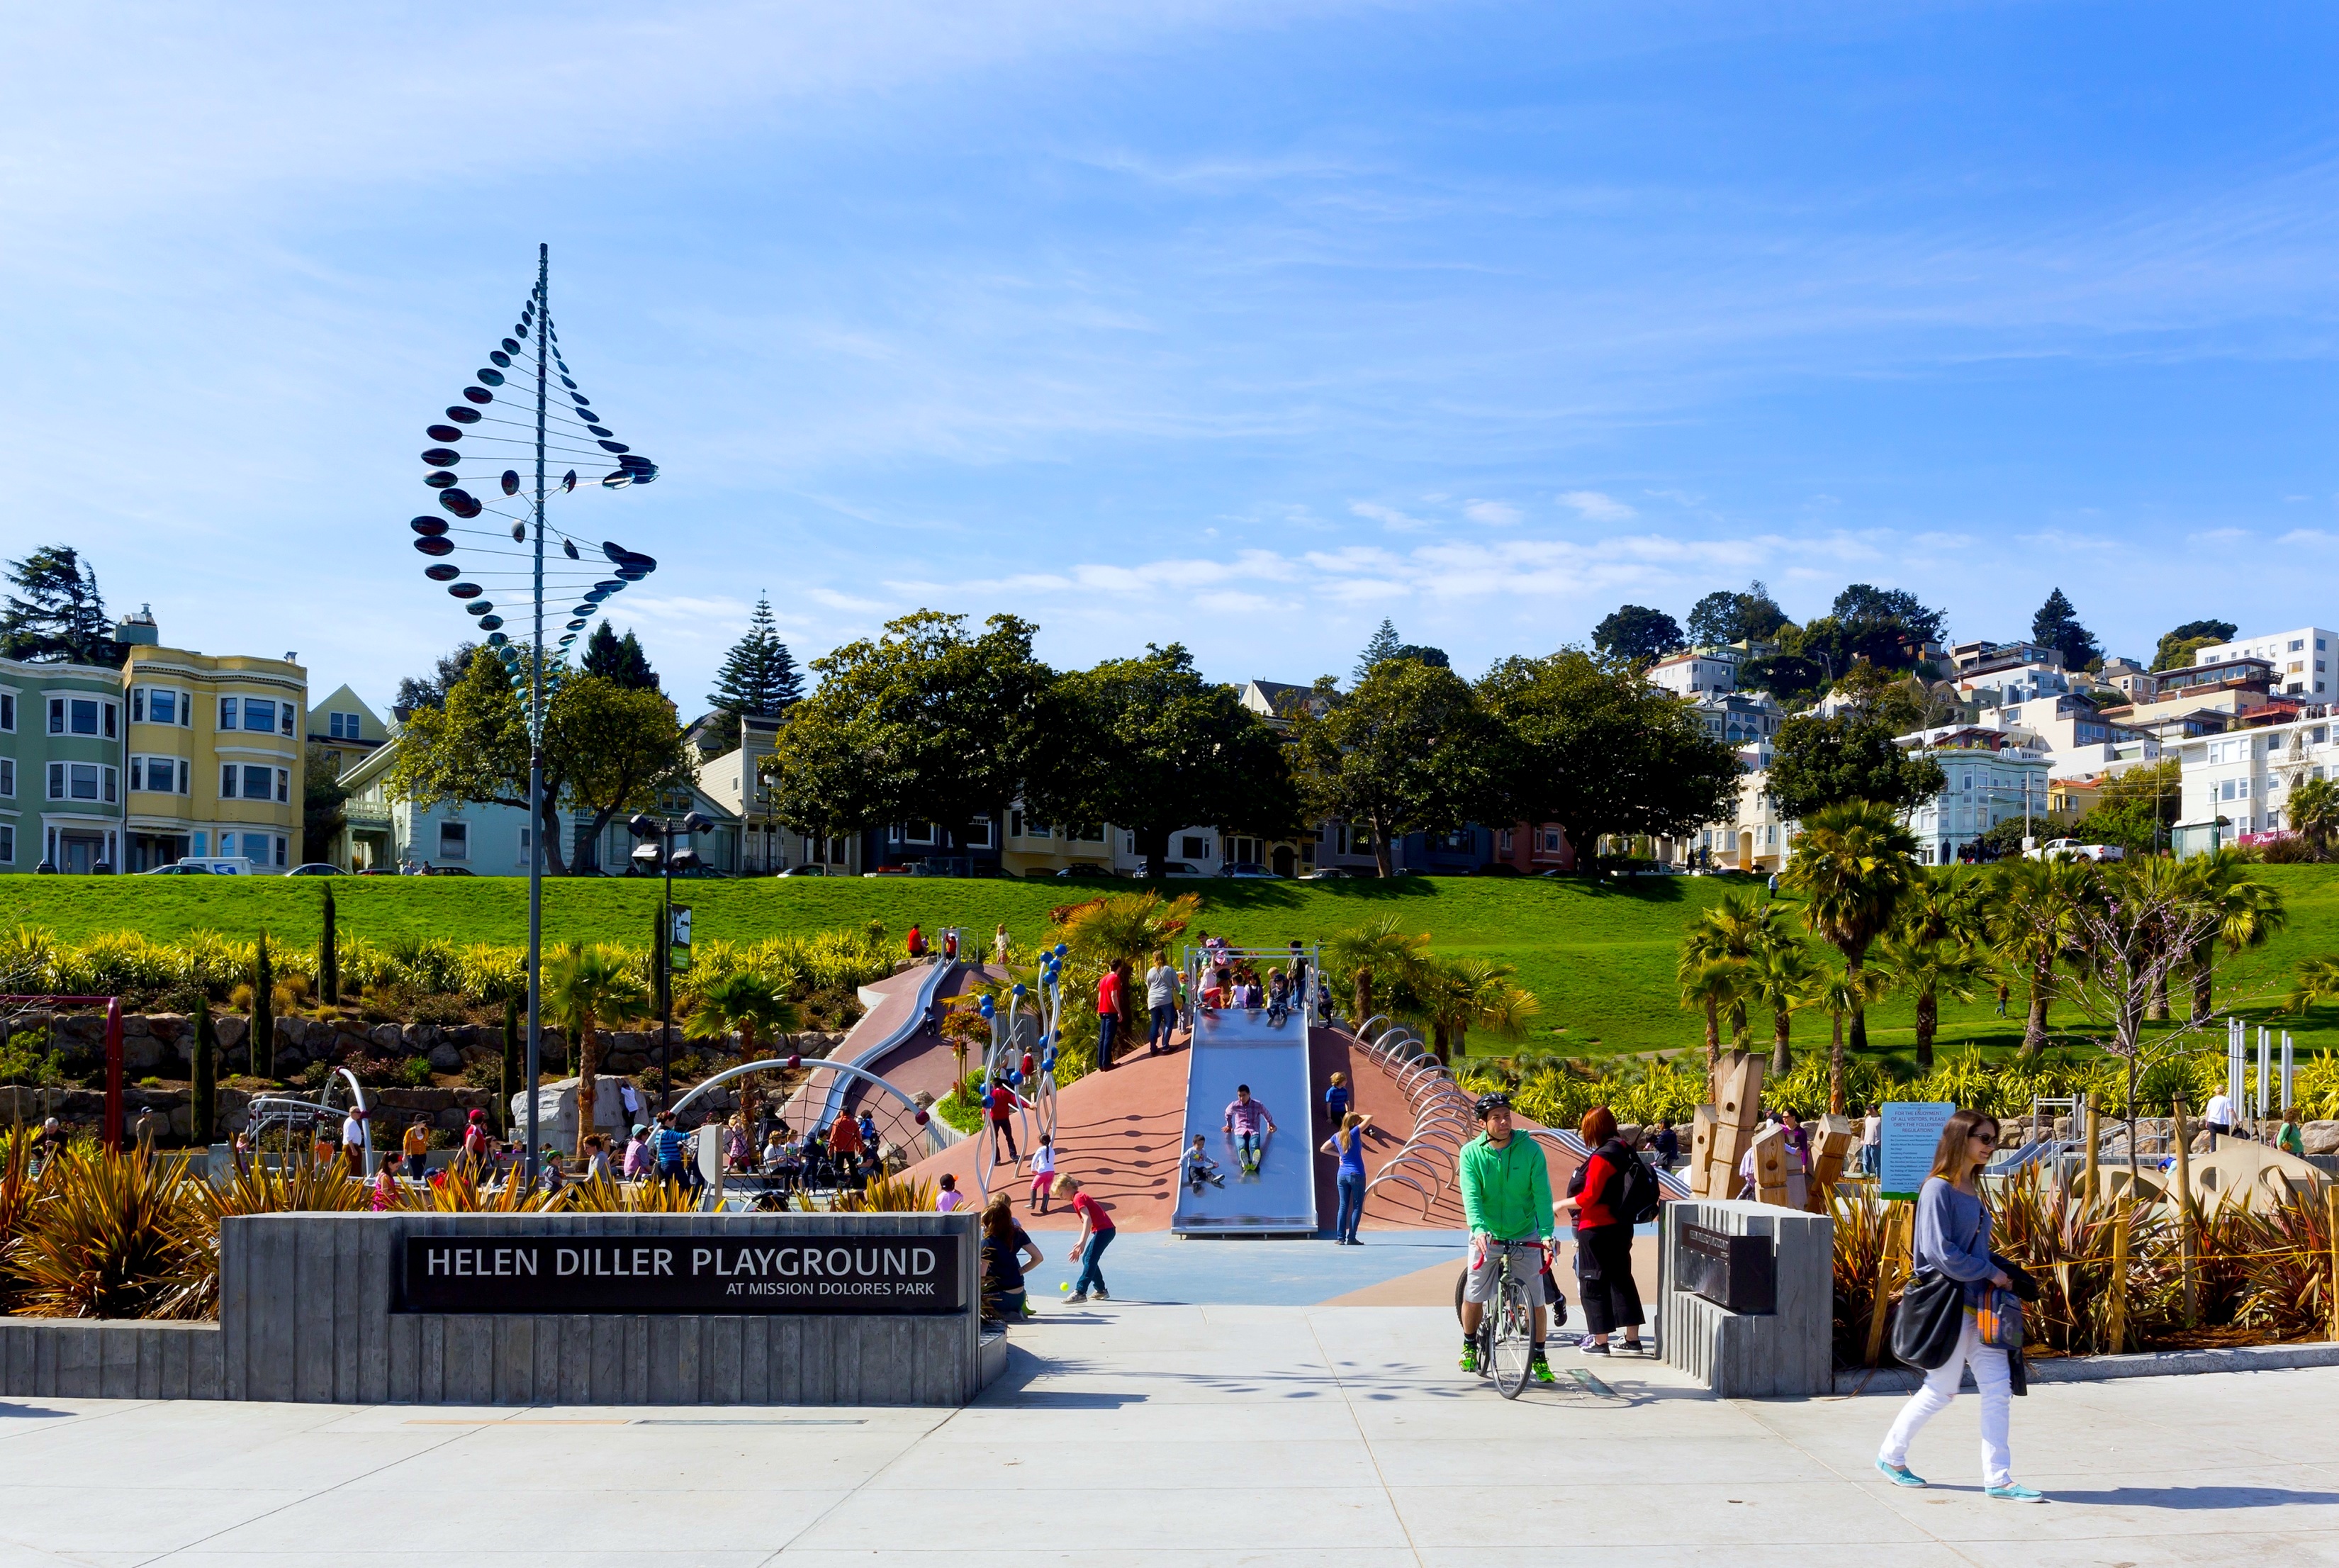 View of Mission Dolores Park showing people playing outside